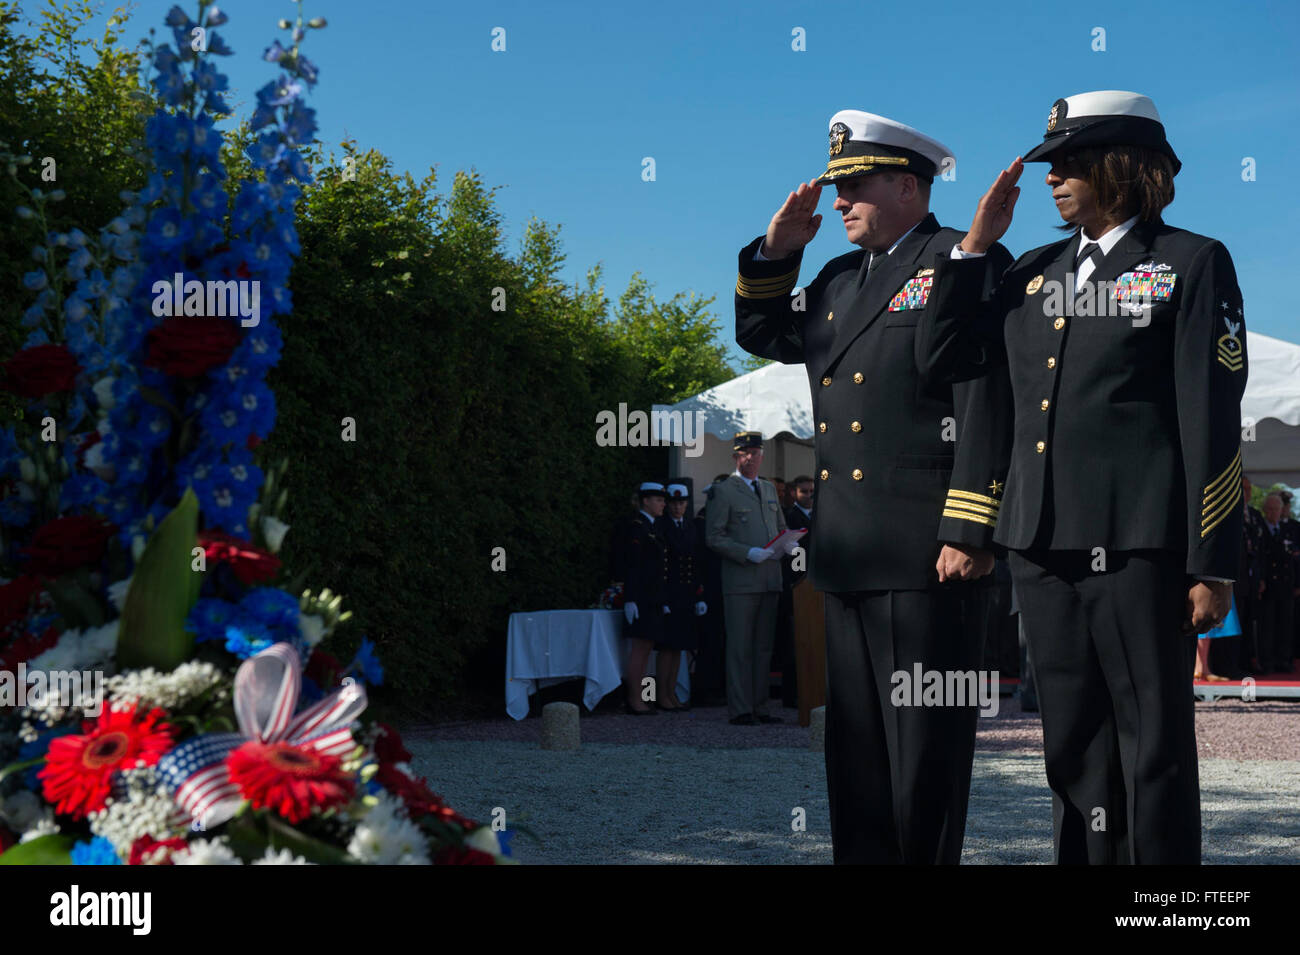 140606-N-YO152-096 UTAH BEACH, France (June 6, 2014) - Cmdr. Brian Diebold, commanding officer of USS Oscar Austin (DDG 79), and CMDCM (SW/AW) Dee Allen render honors after laying down a wreath at the memorial ceremony just off the coast of Utah Beach. The event was one of several commemorations of the 70th Anniversary of D-Day operations conducted by Allied forces World War II June 5-6, 1944. Over 650 U.S. military personnel have joined troops from several NATO nations to participate in ceremonies to honor the events at the invitation of the French government. (U.S. Navy photo by Mass Communi Stock Photo